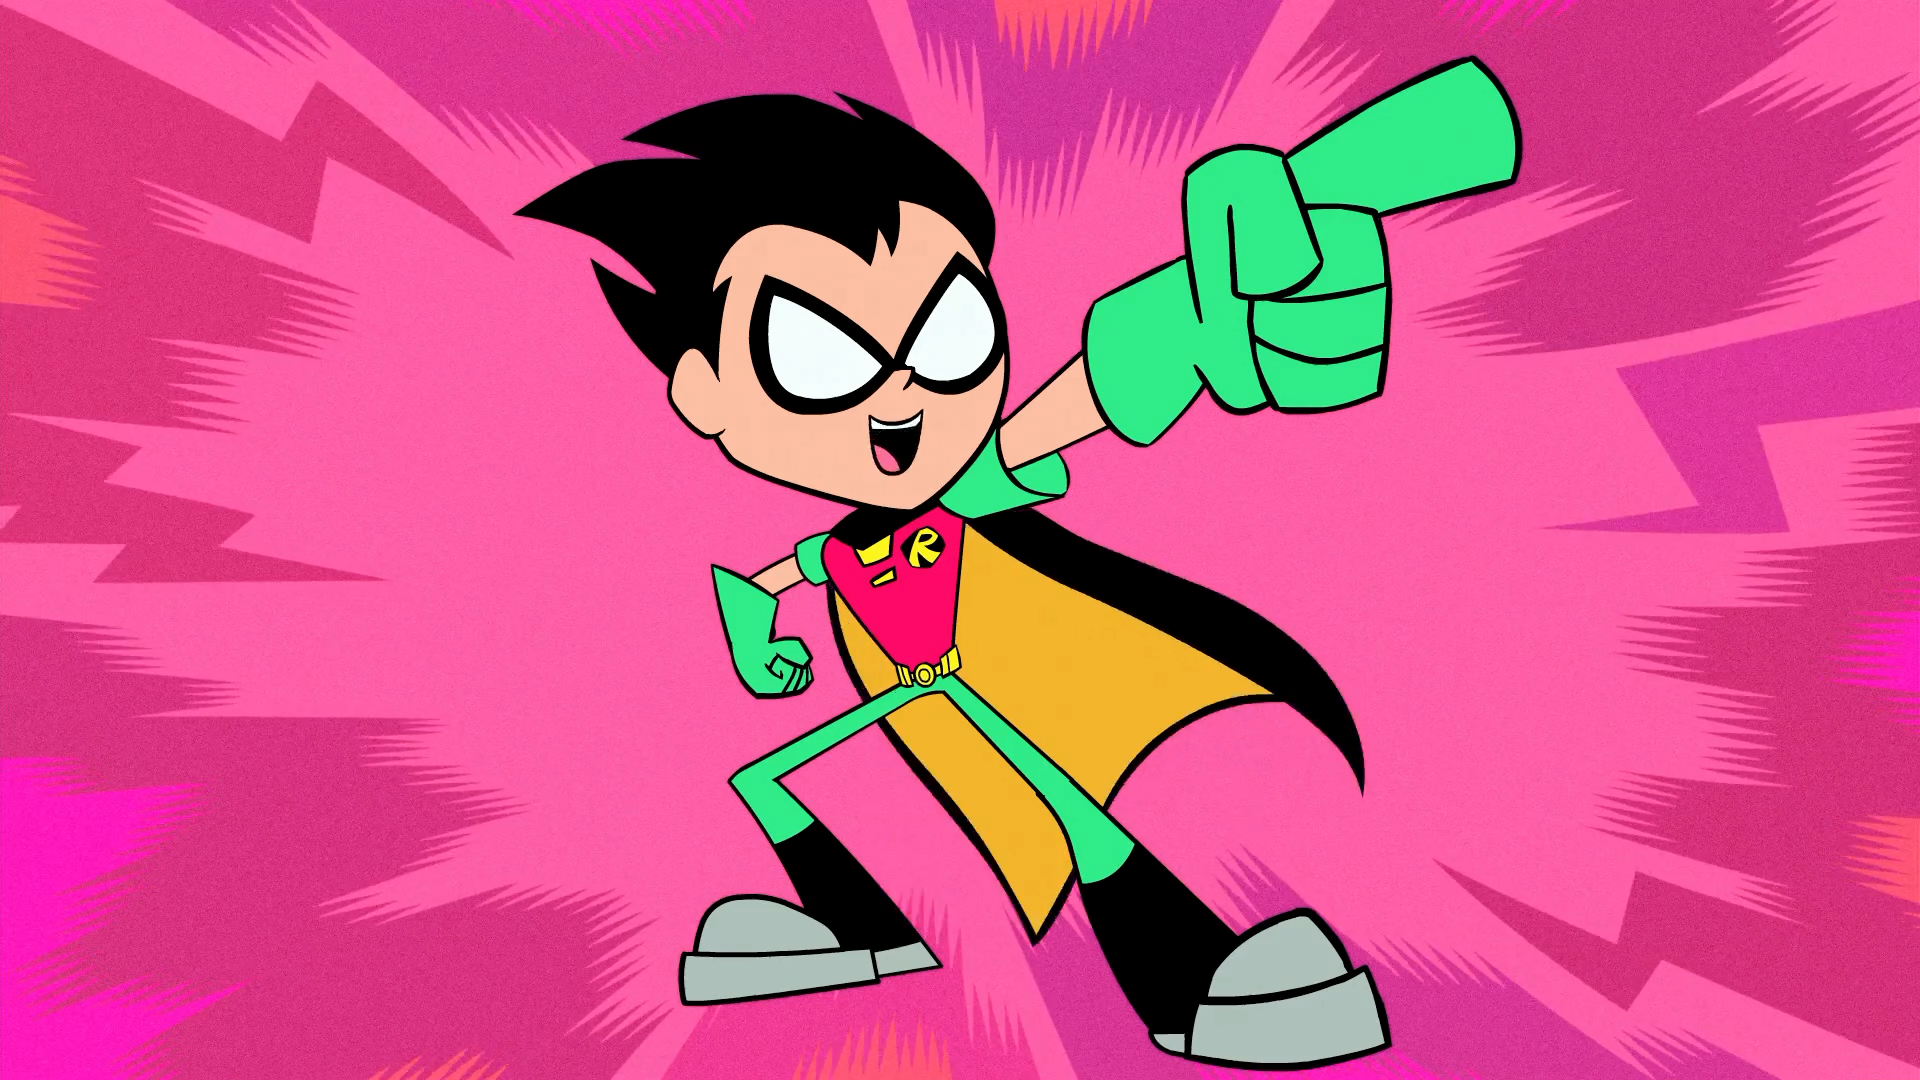 Teen Titans Go!, Join the Adventures of Robin and his Teen Titan Friends